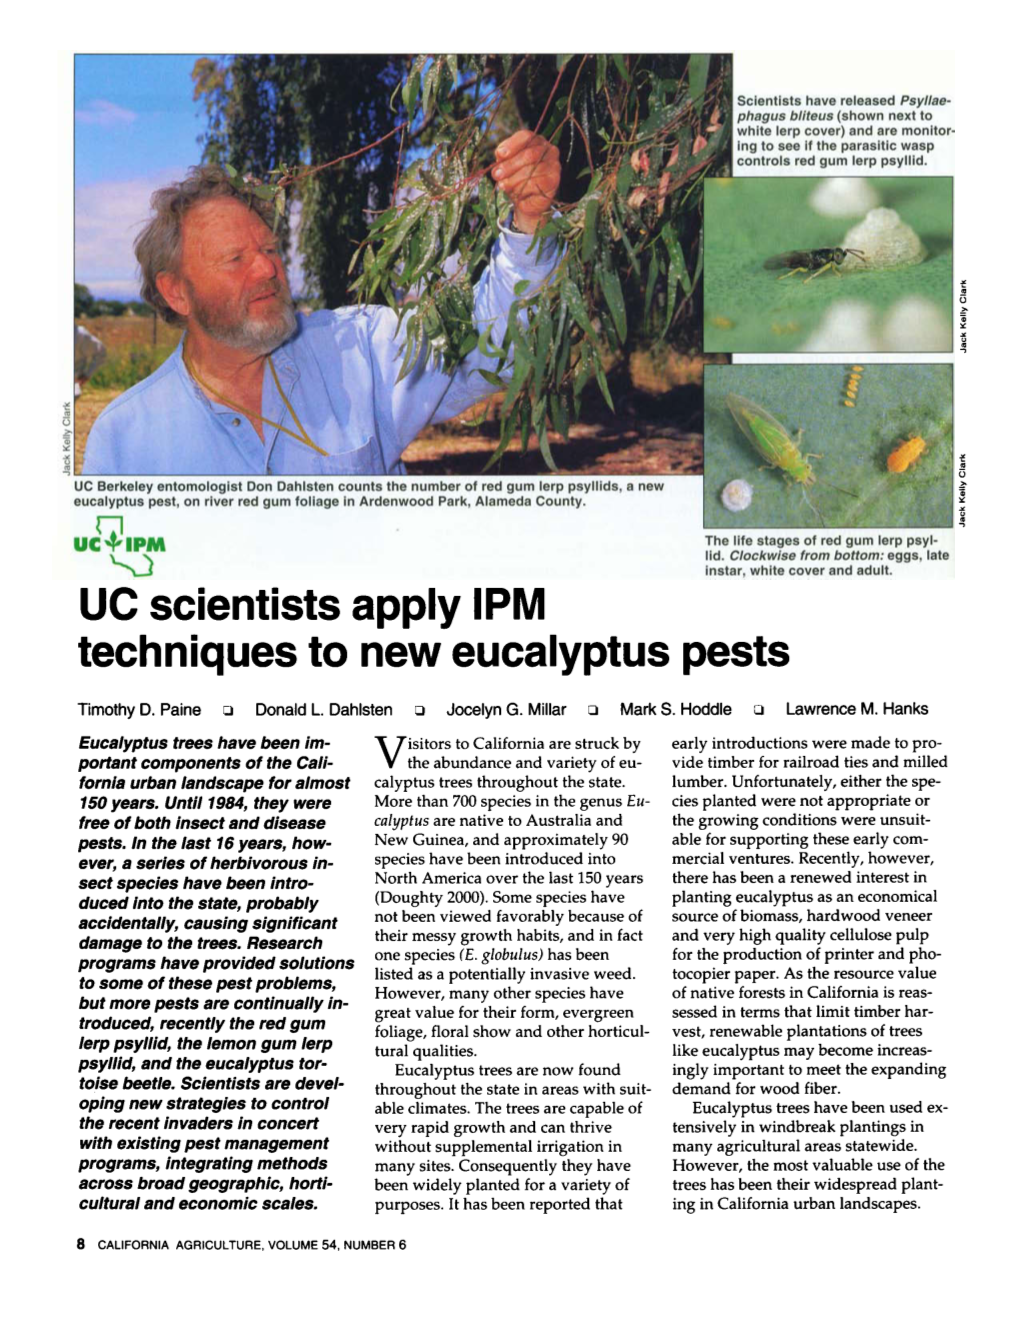 UC Scientists Apply IPM Techniques to New Eucalyptus Pests